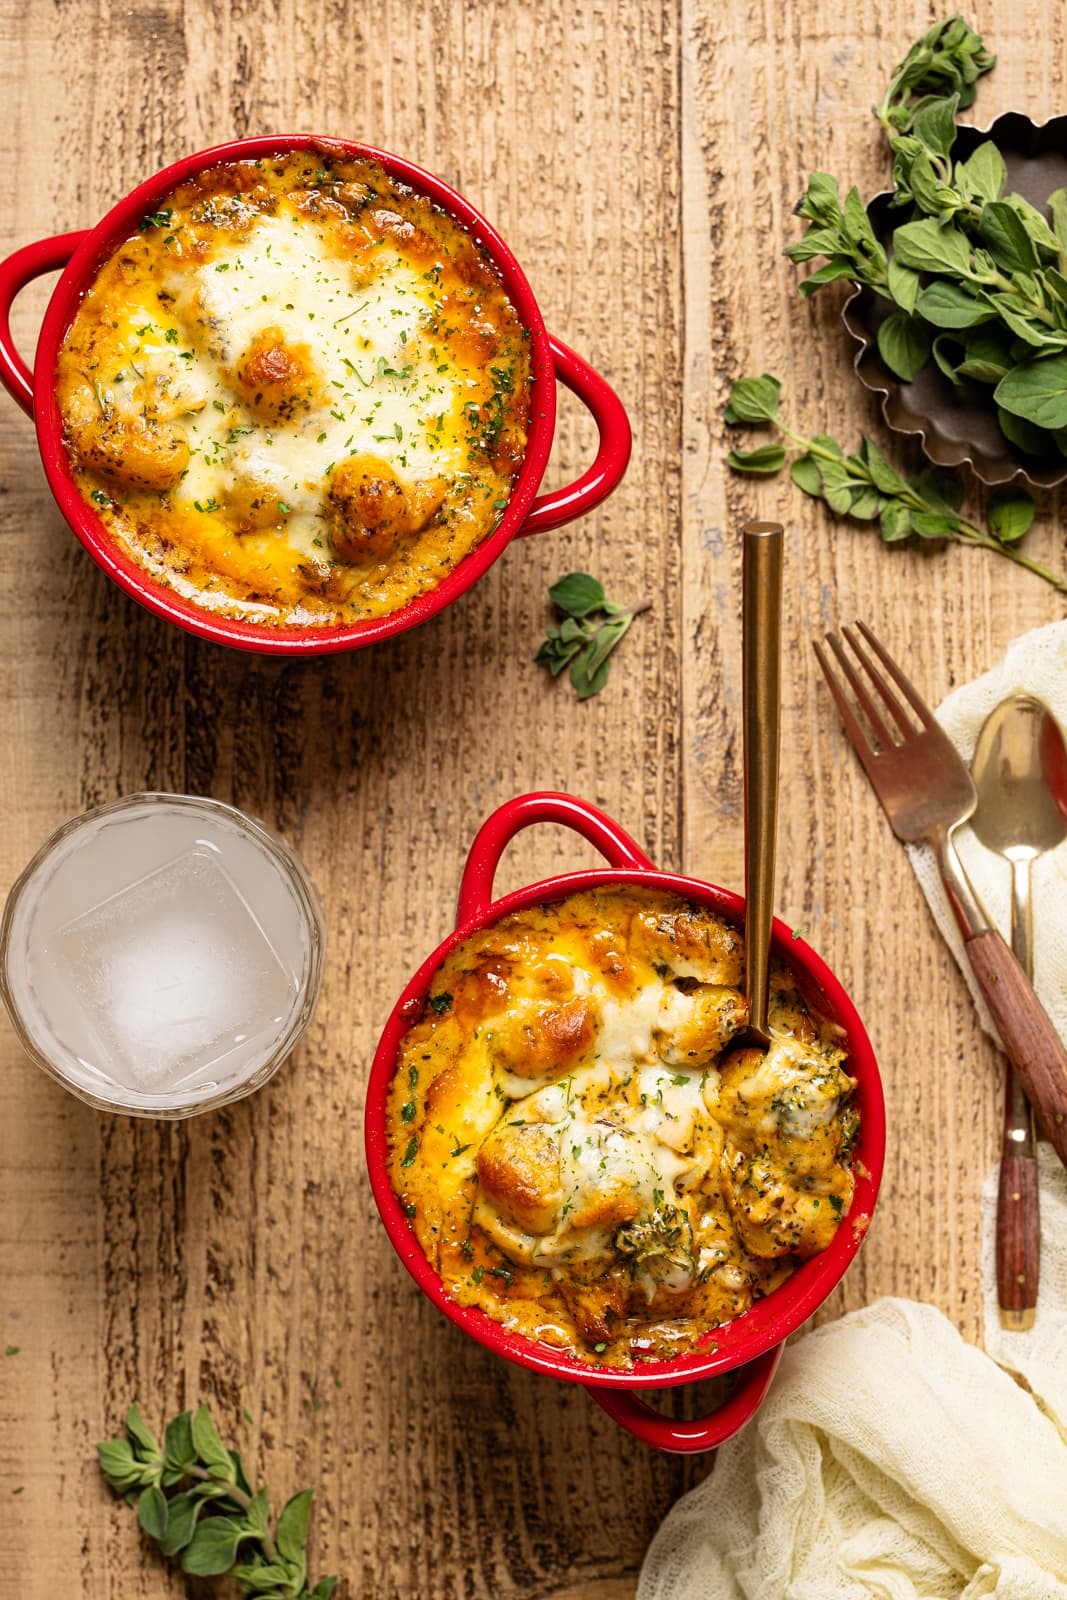 Baked chicken and gnocchi in two red bowls on a brown wood table with a fork, spoon, and drink.